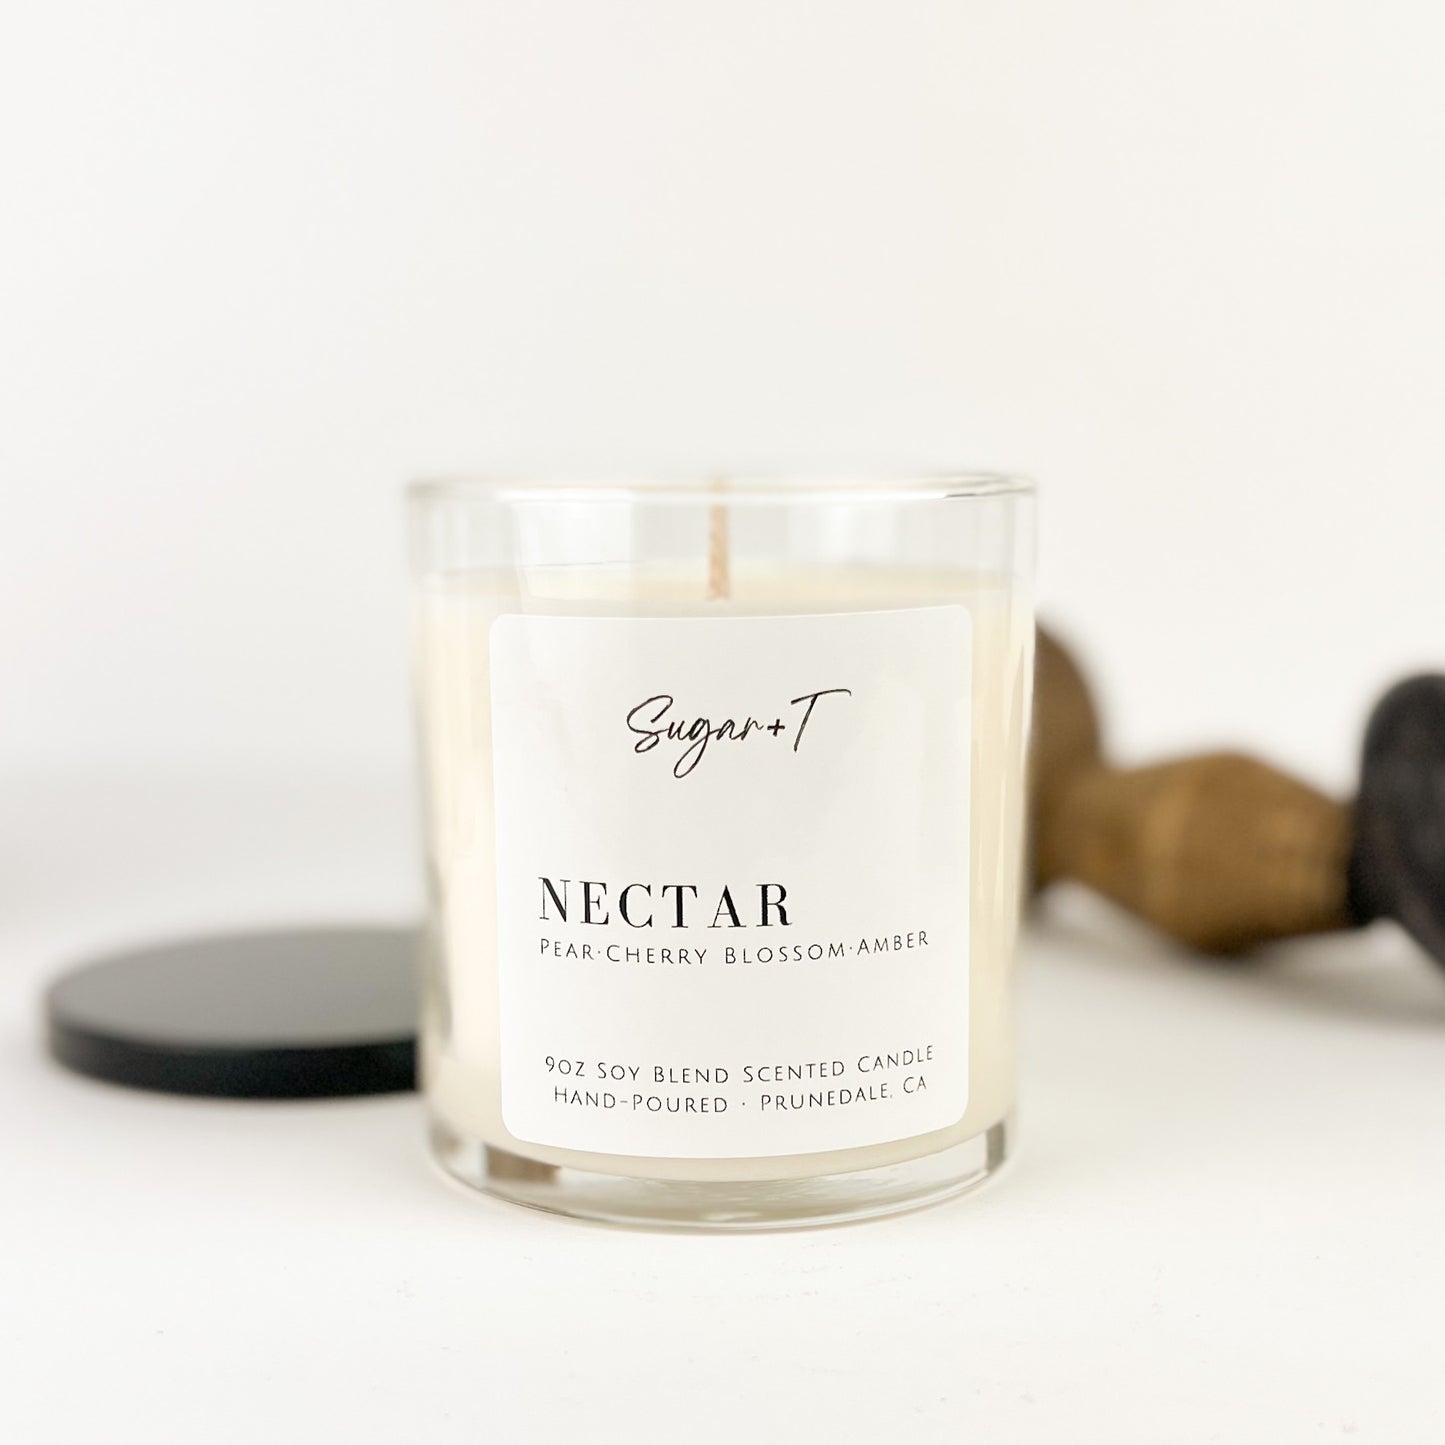 Nectar Scented Candle